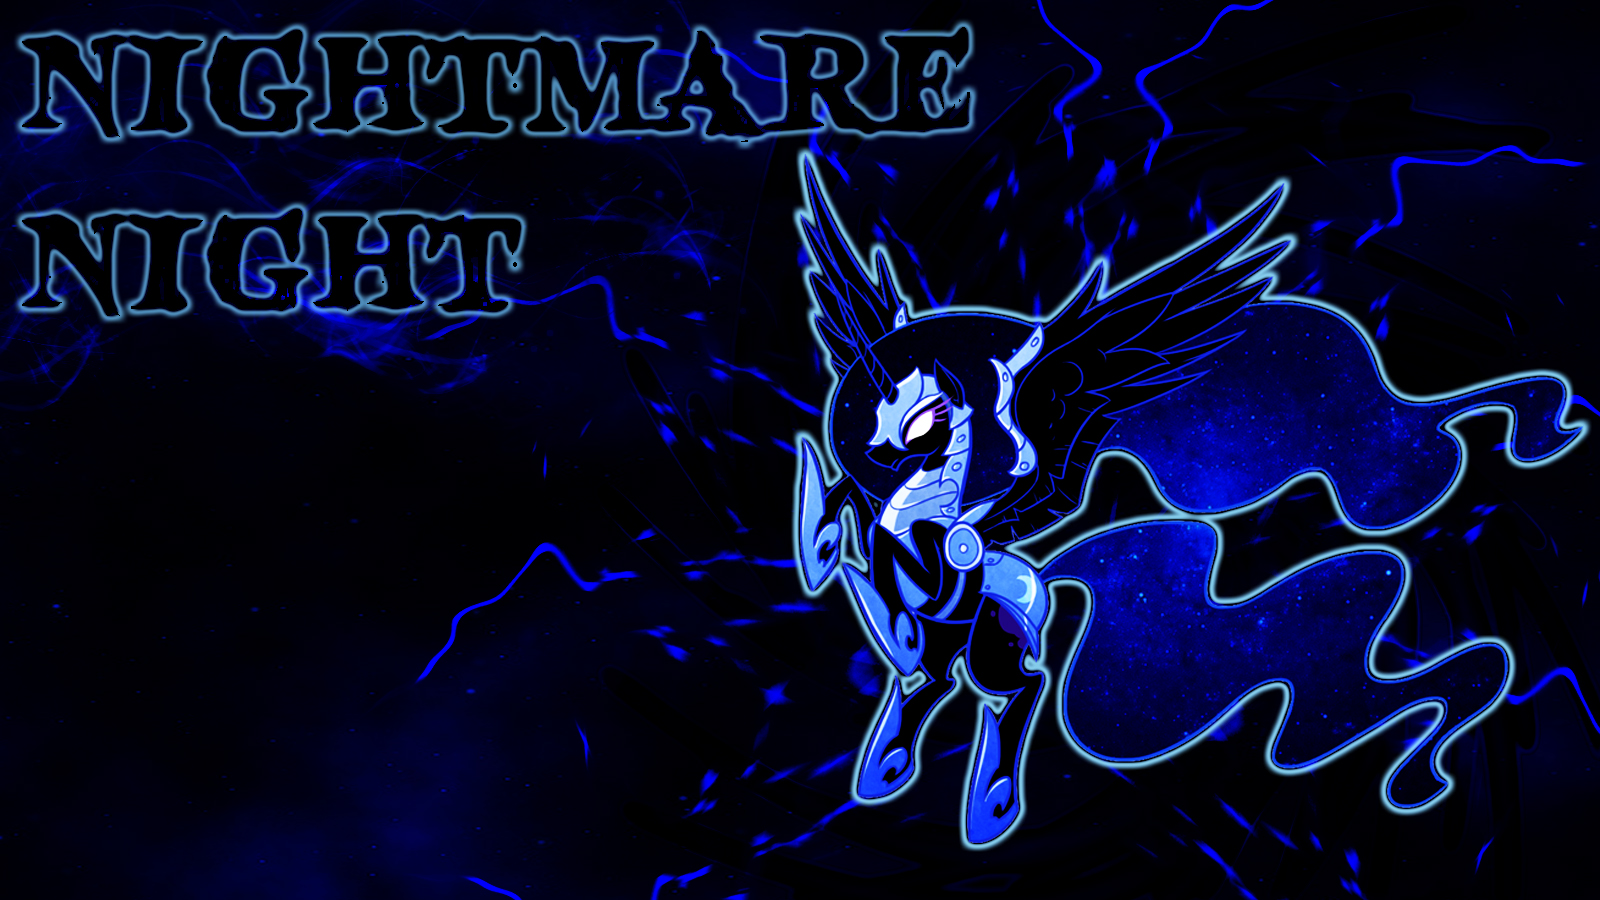 Nightmare Night wallpaper by ALoopyDuck on